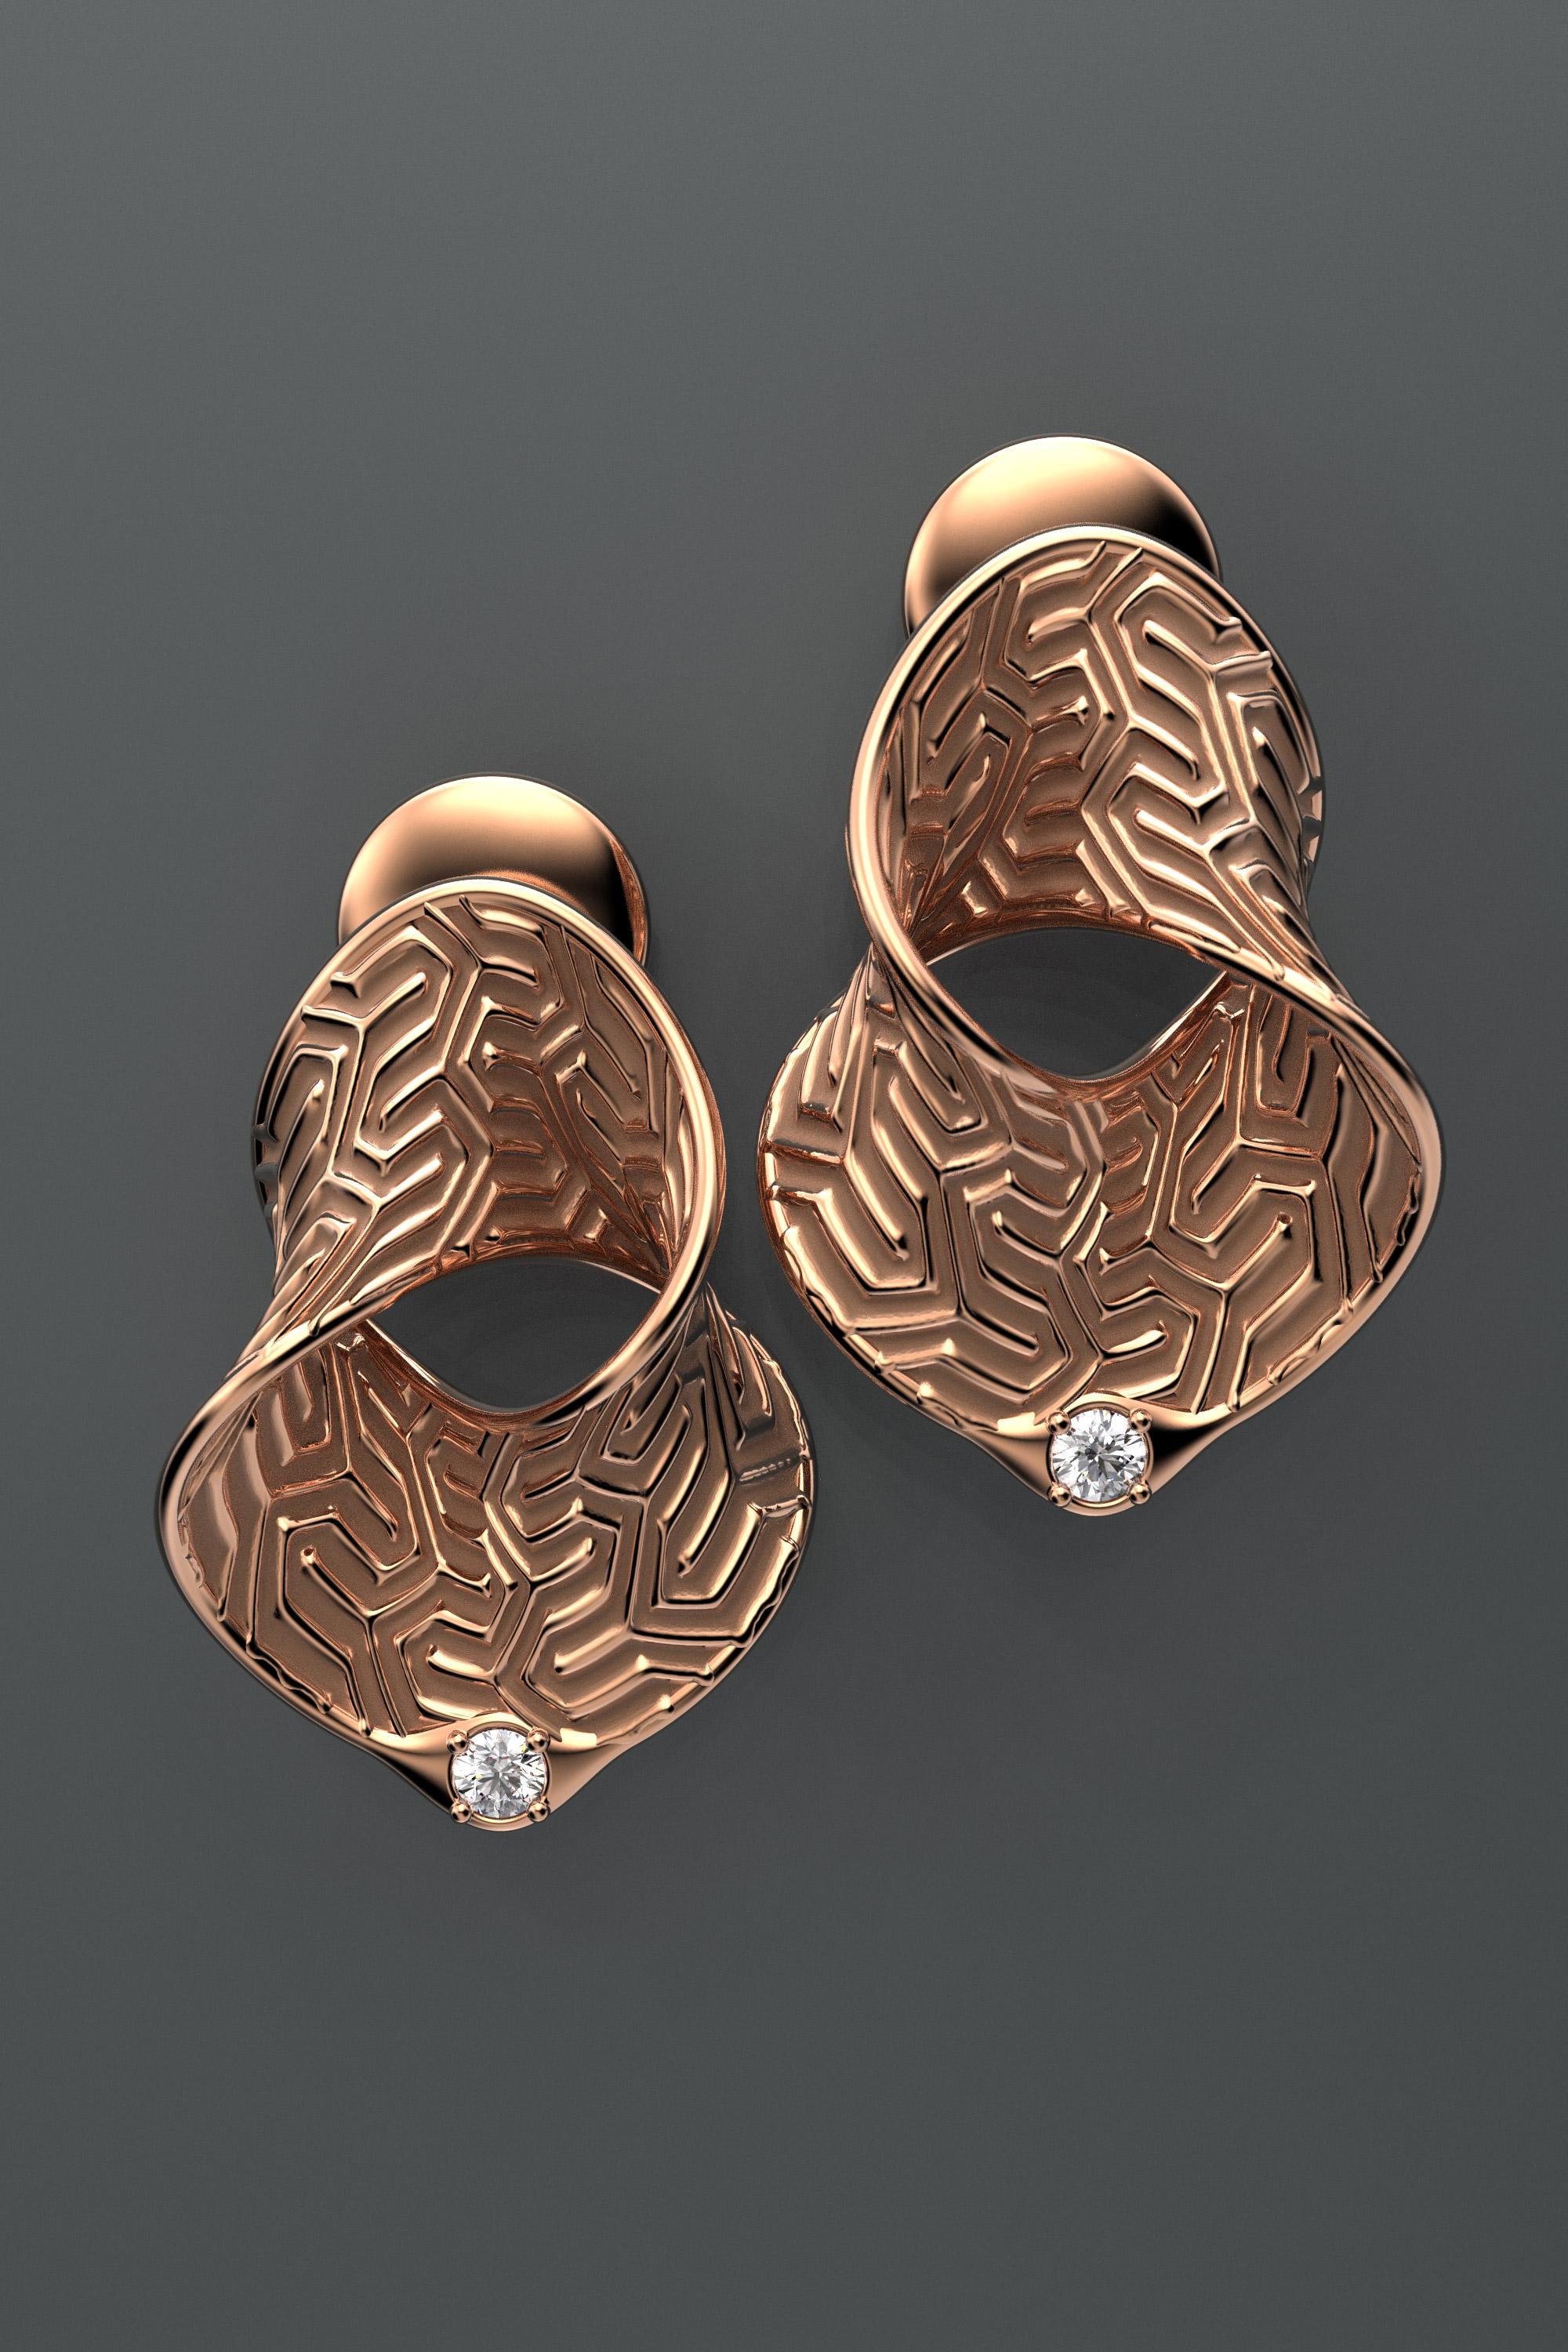 Brilliant Cut 14k Gold Diamond Earrings Made in Italy by, Italian Jewelry For Sale